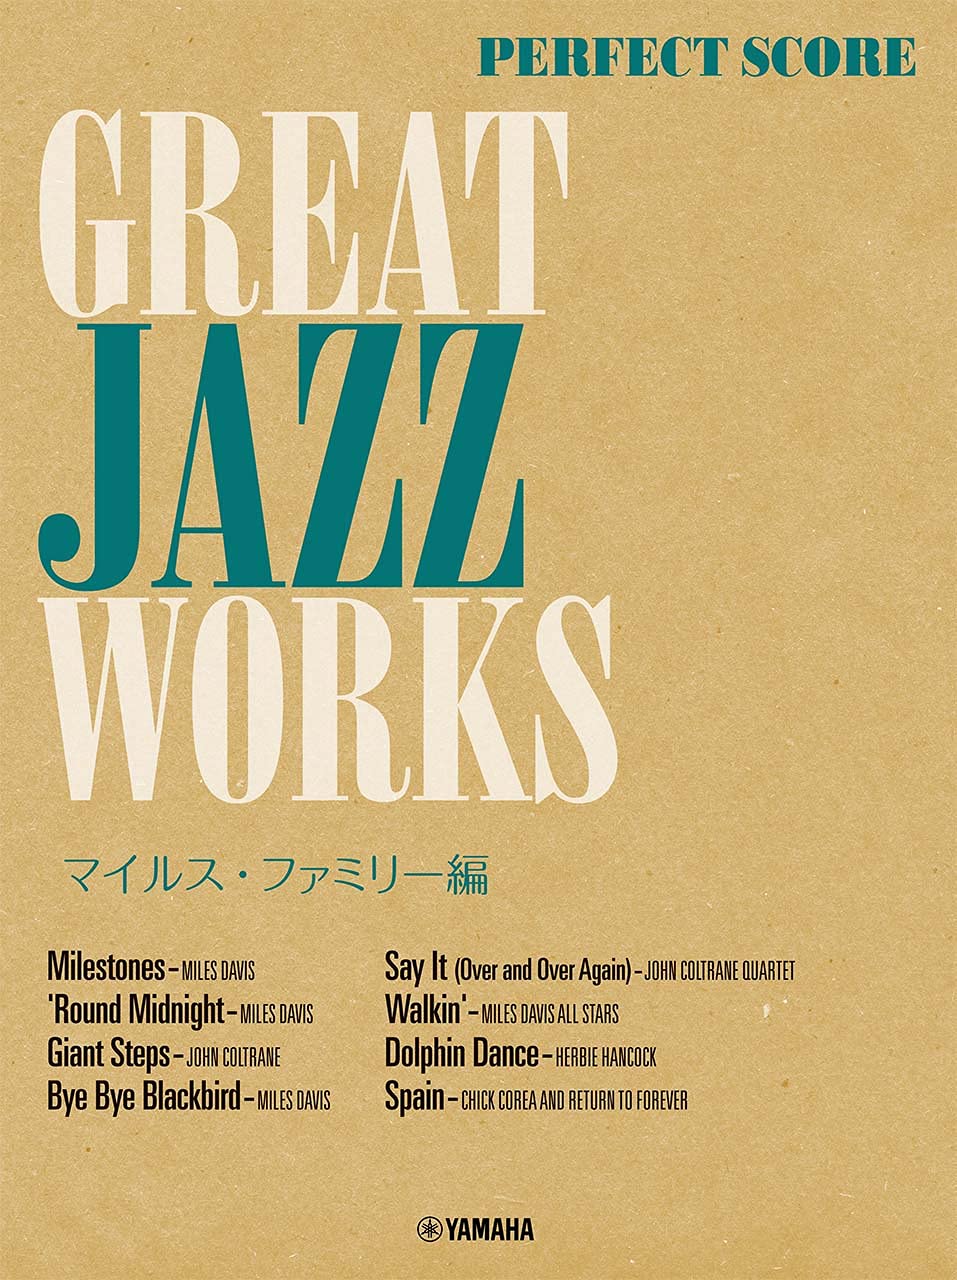 Great Jazz Works~ Miles family~ for Band Score Perfect Music Score (Advanced)